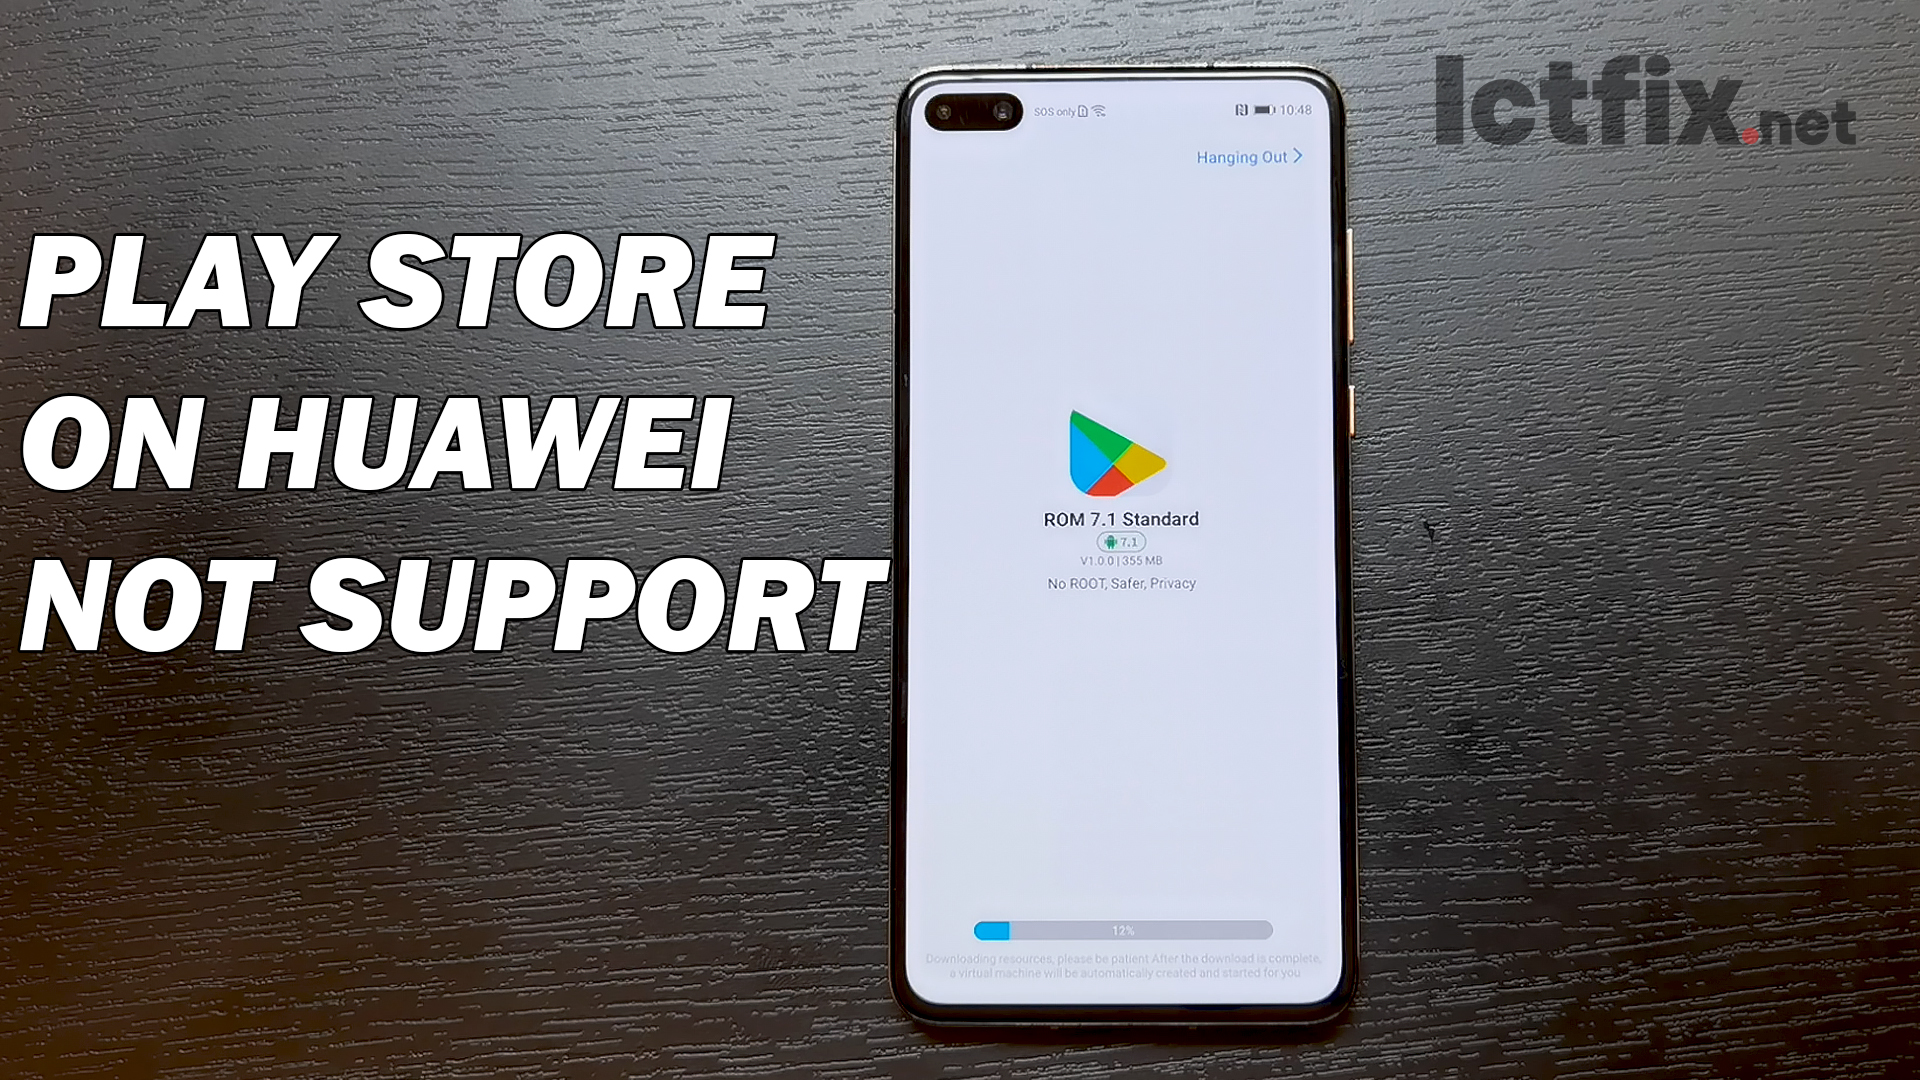 Google Play Store on Huawei NOT SUPPORT - ICTfix